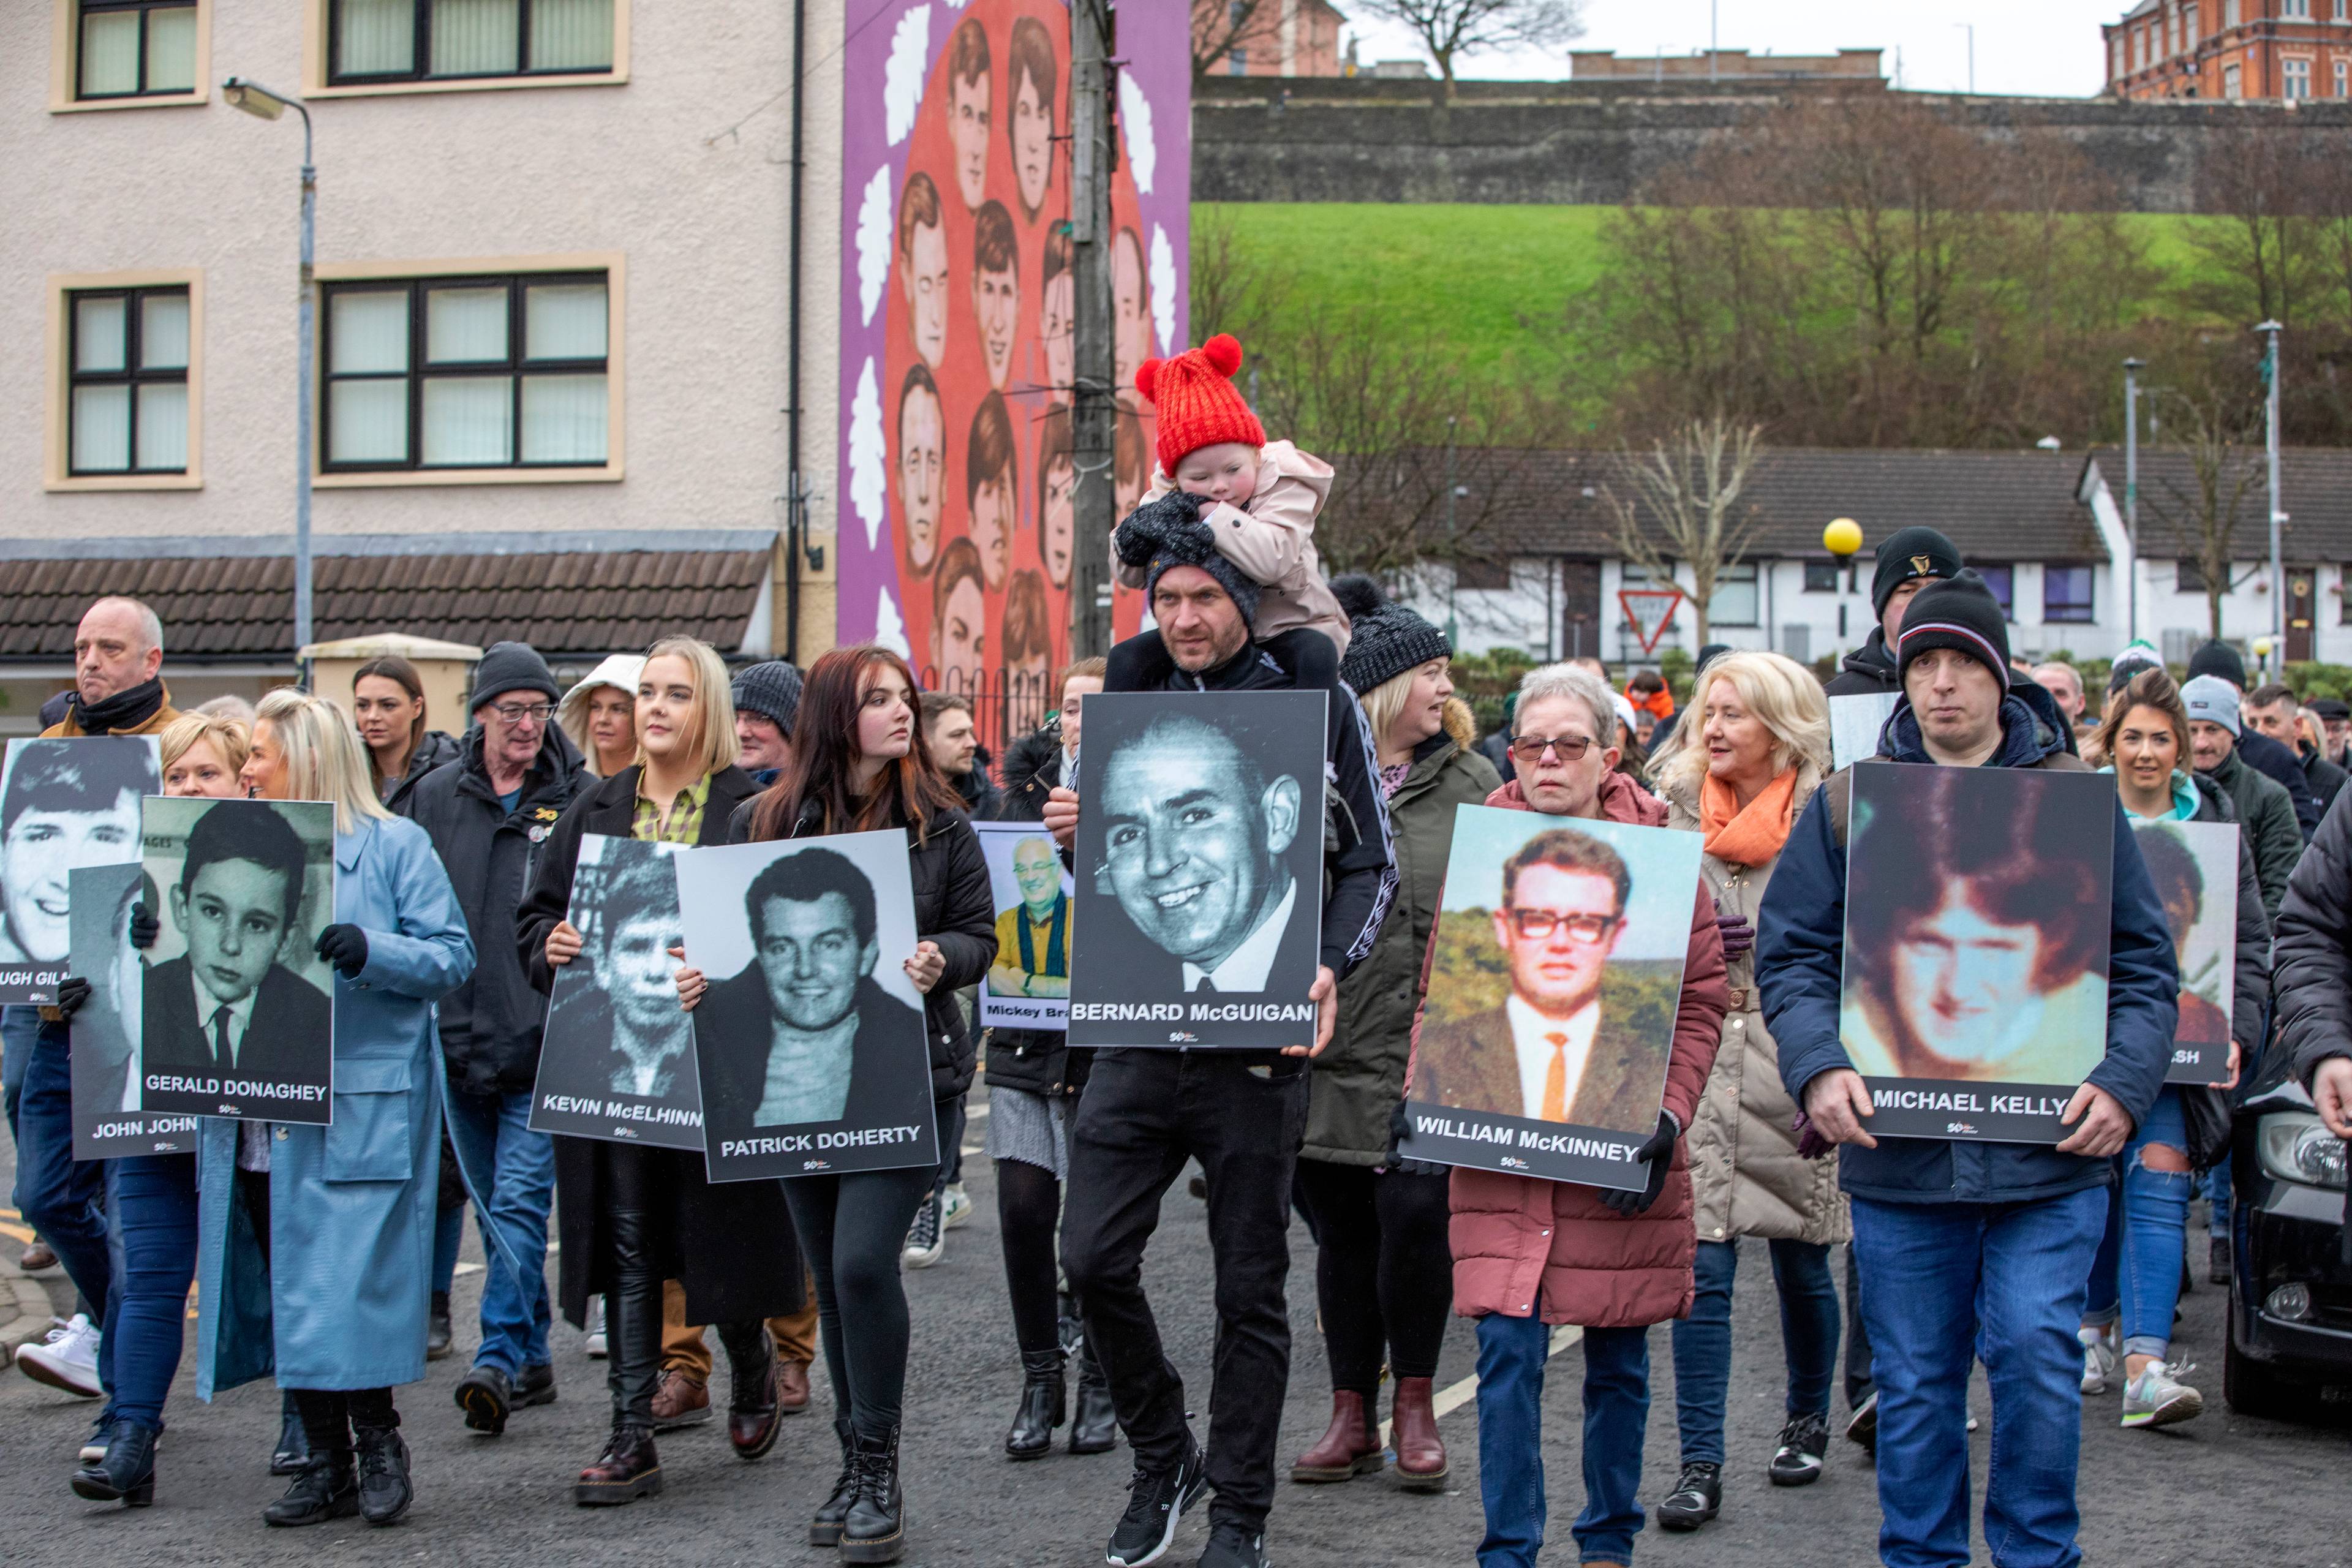 Family members carry photographs of those killed on Bloody Sunday at a memorial march to the Bogside for a wreath laying ceremony at a monument to those killed on the day, in Londonderry (Derry), Northern Ireland, on January 30, 2022, on the 50th anniversary of the Bloody Sunday shootings. - The Northern Irish city of Londonderry began commemorations Sunday of one of the darkest days in modern UK history when, 50 years ago, British troops without provocation killed 13 unarmed civil rights protesters. (Photo by PAUL FAITH / AFP)